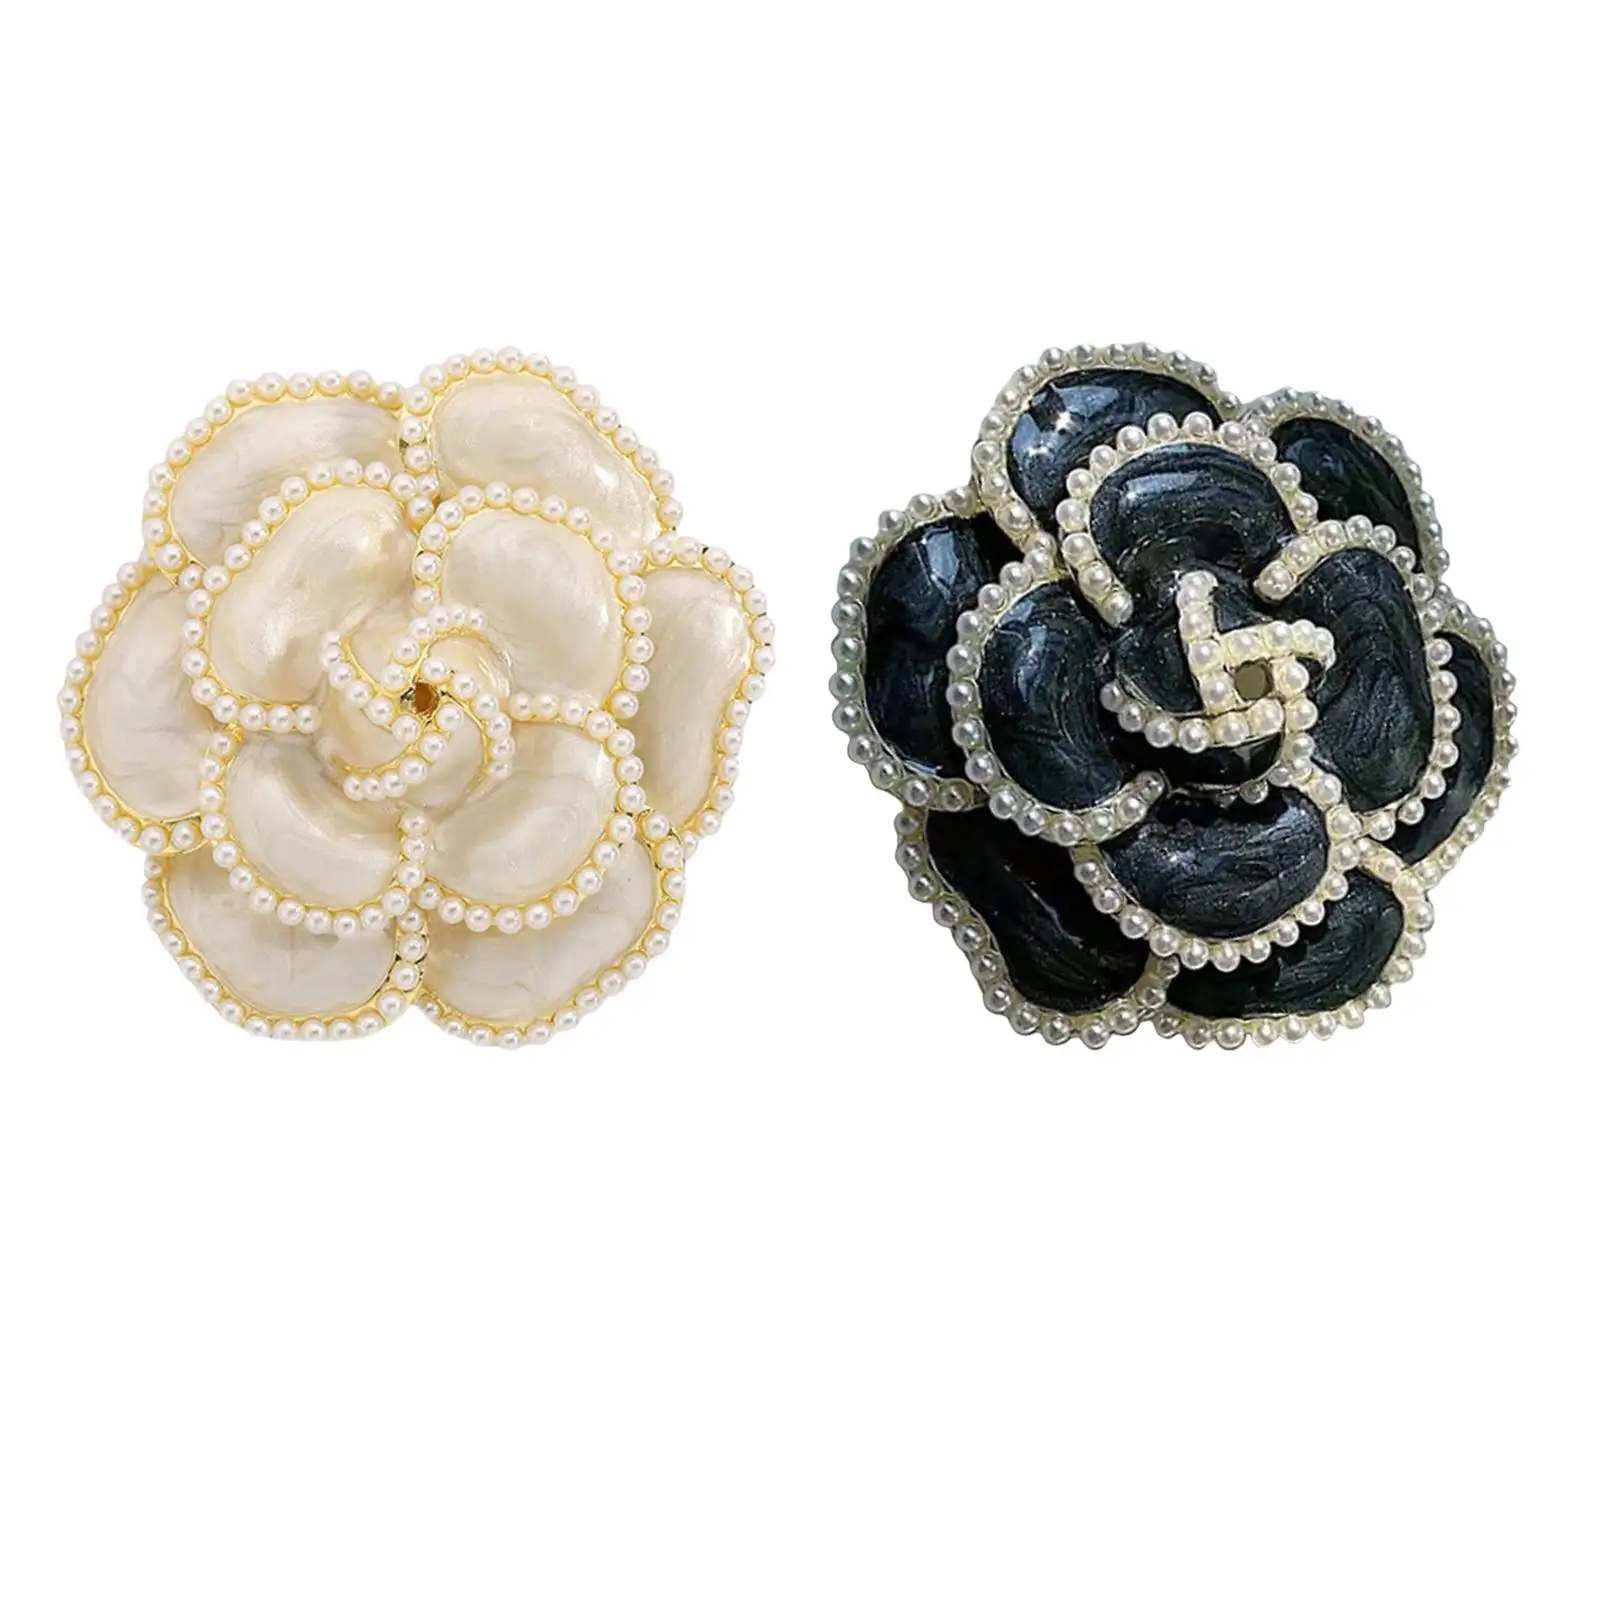 Stylish Brooch Decoration Clothing Accessories DIY Craft Exquisite Floral Lapel Pin for Suit Evening Party Backpack Scarf Blouse